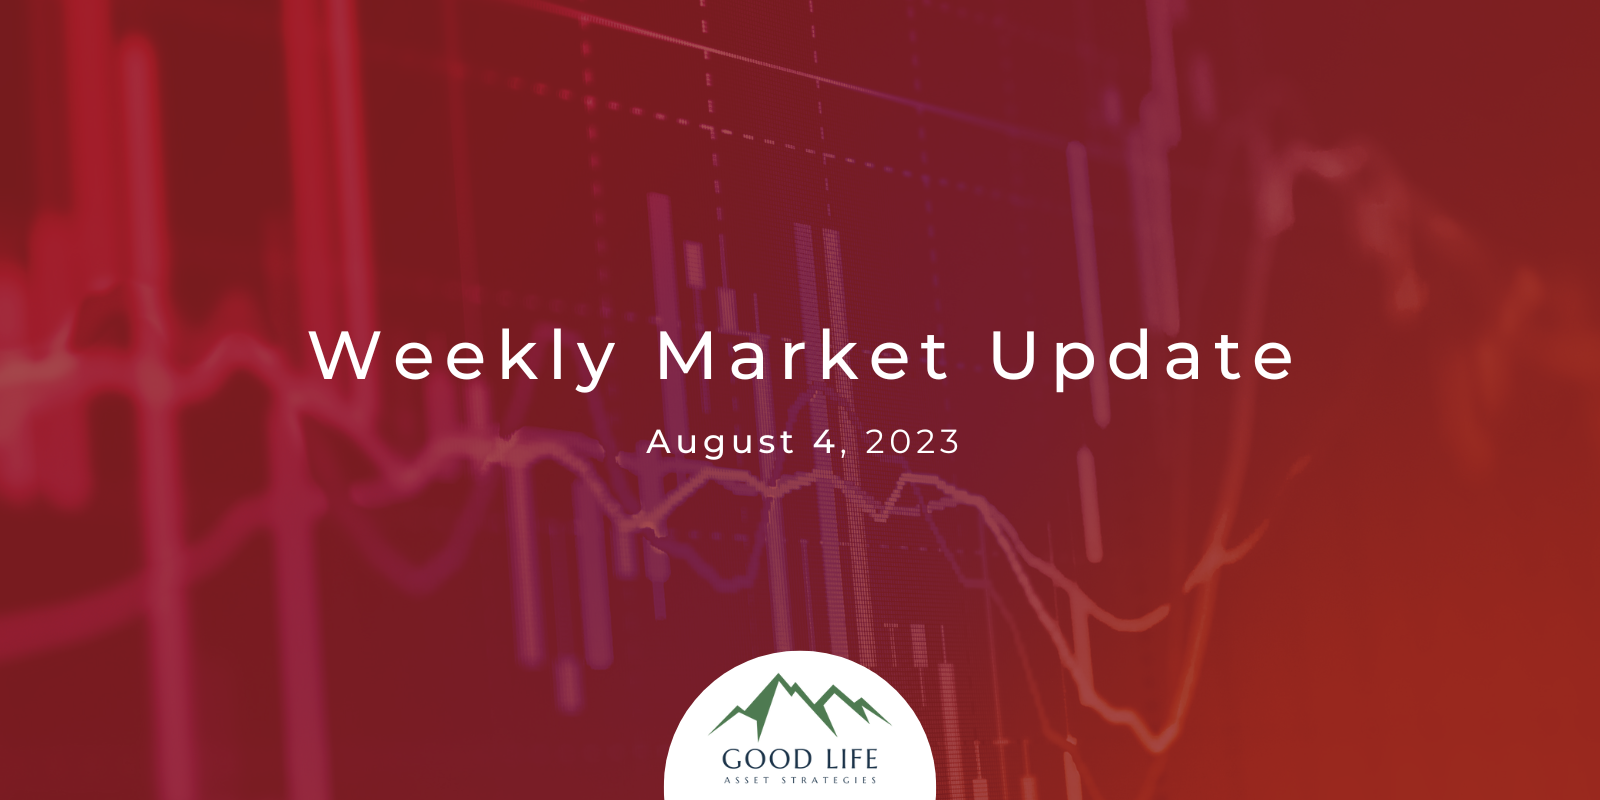 Weekly Market Update for August 4, 2023, from DeWayne Hall: Fitch Ratings Downgrade the U.S. Credit Rating